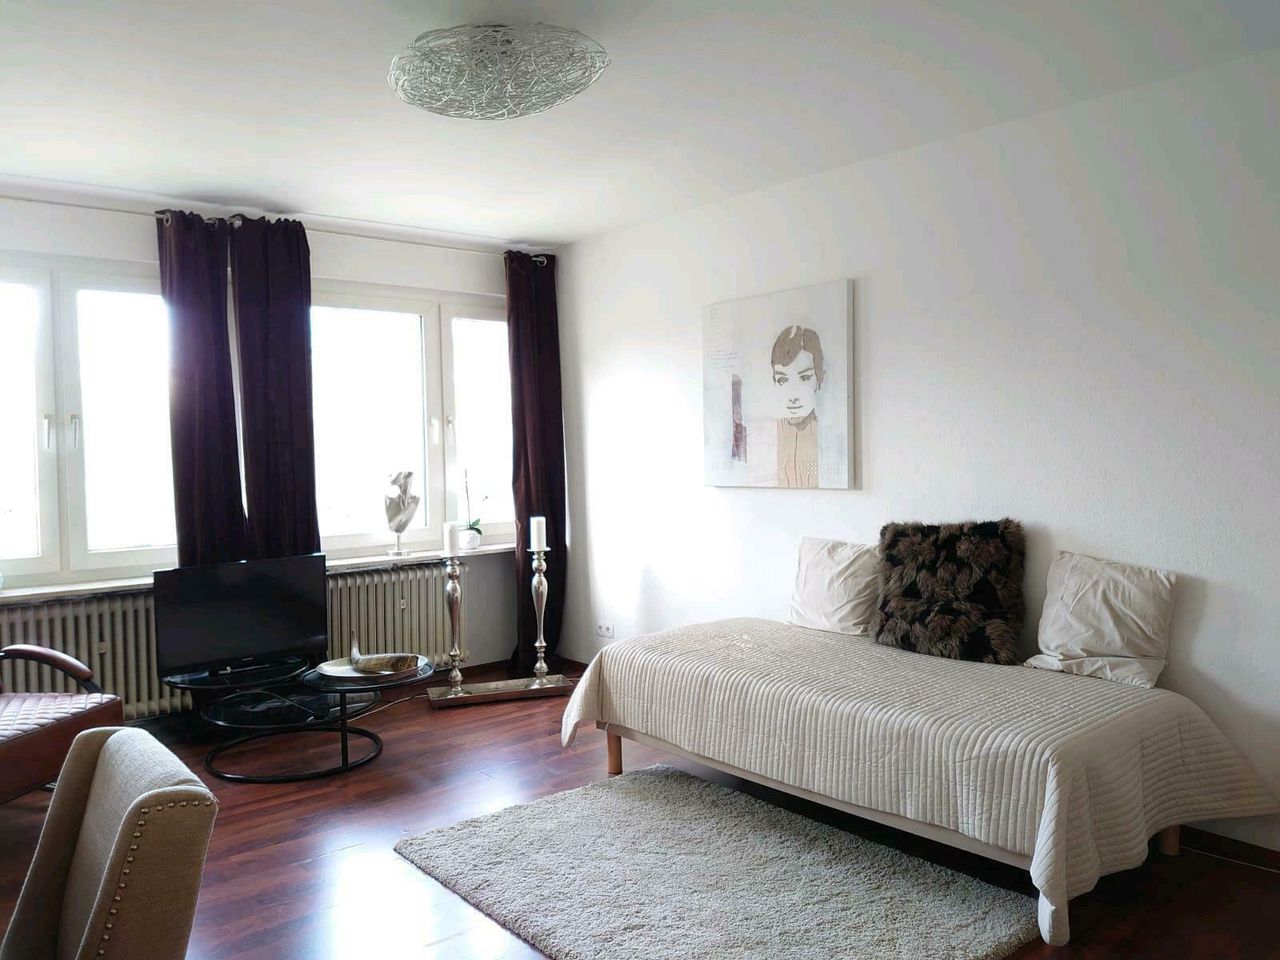 Great studio apartment in the middle of Essen